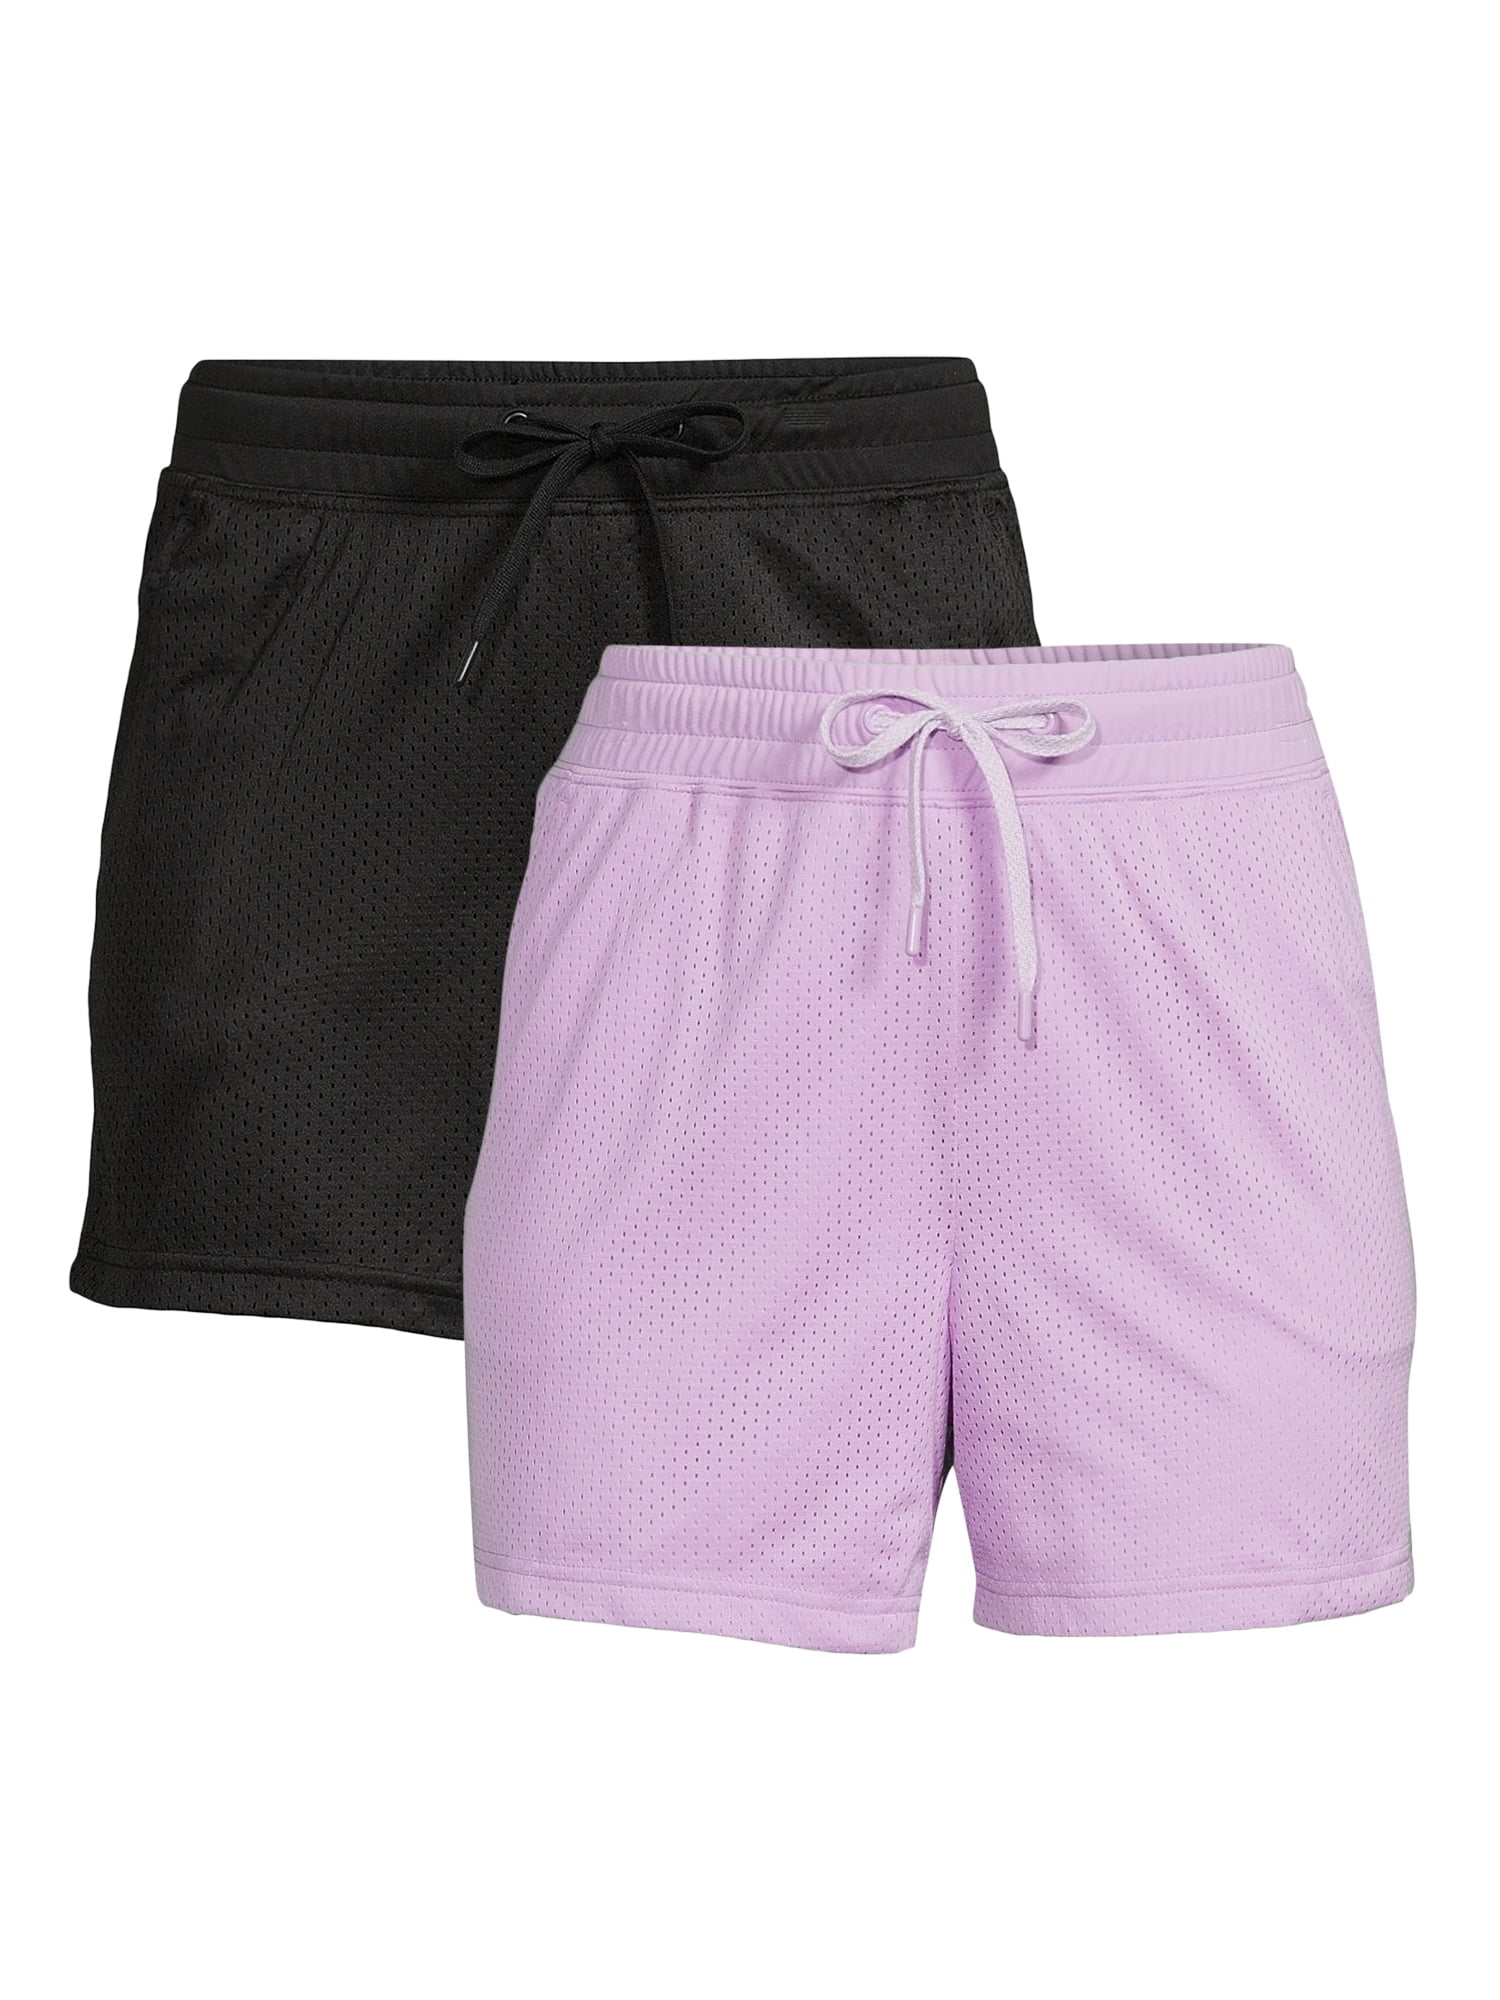 Athletic Works Women's Mesh Shorts, 2-Pack 